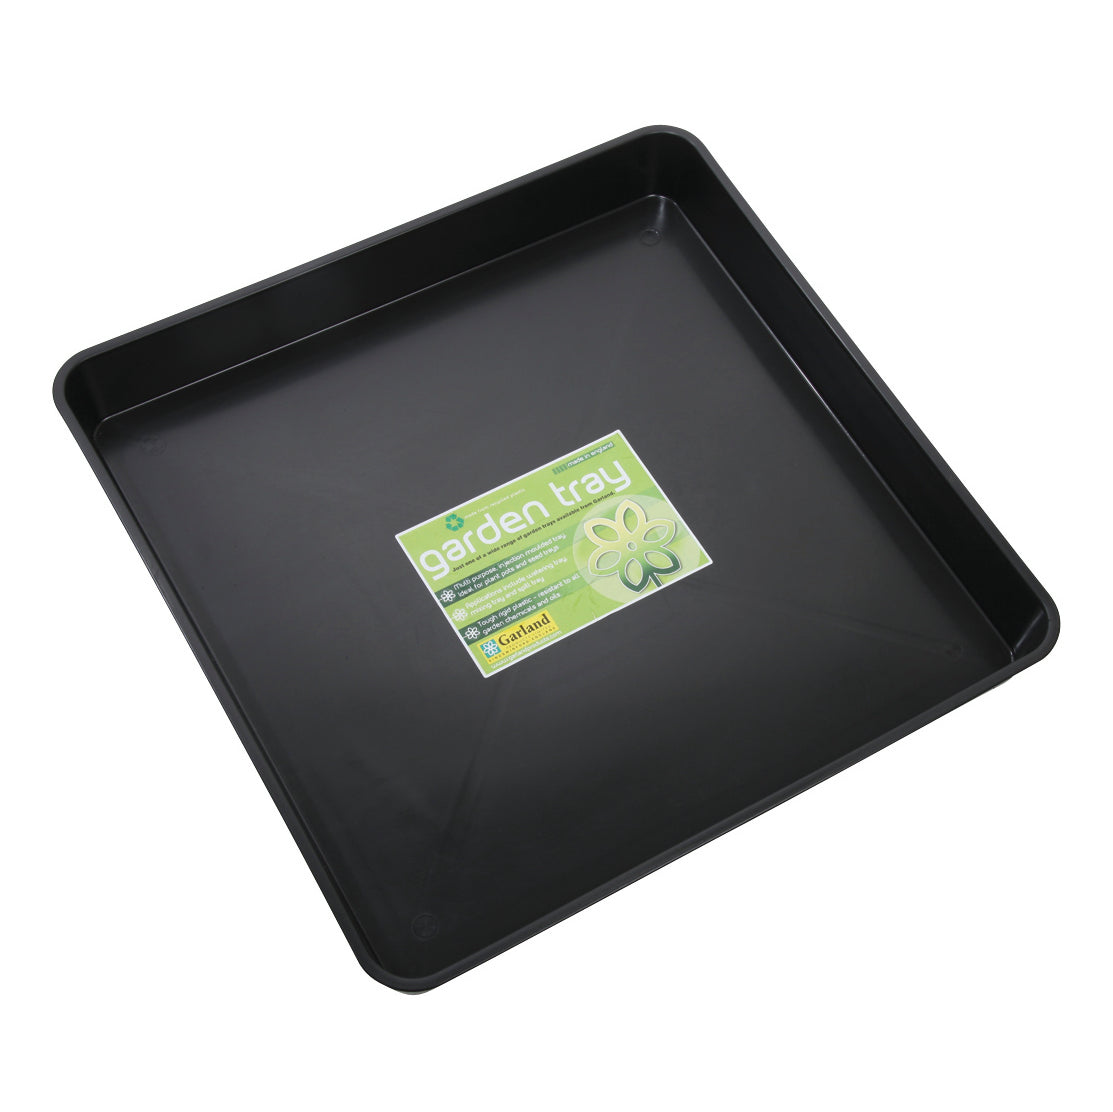 Black Square Garden Tray. Made of recycled polypropylene. 23"L x 23"W x 3"H, 3.5lbs.